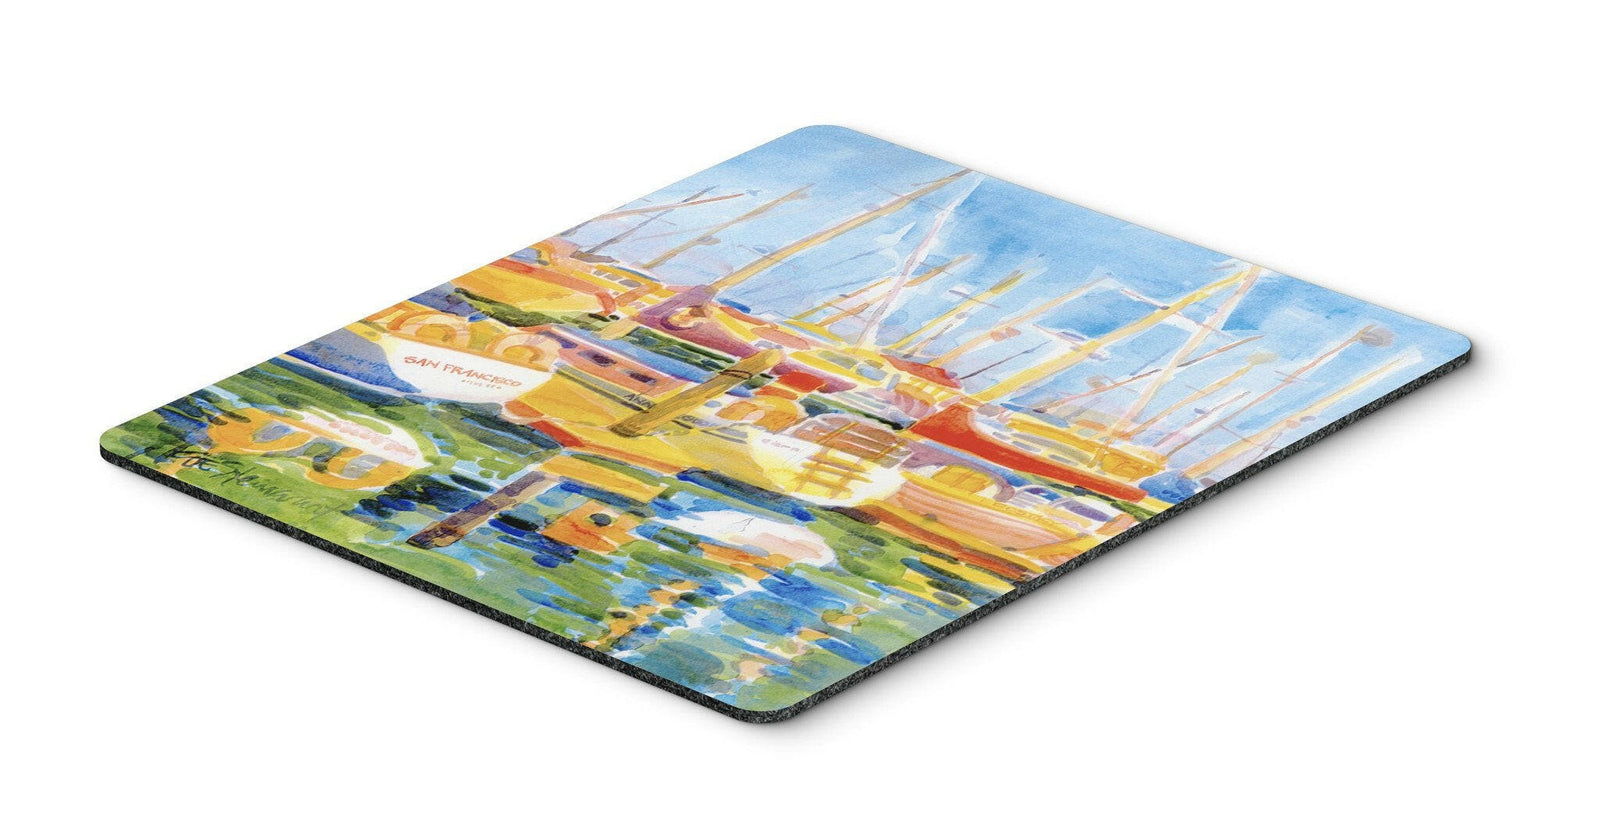 Boats at Harbour Pier  Mouse Pad, Hot Pad or Trivet by Caroline's Treasures